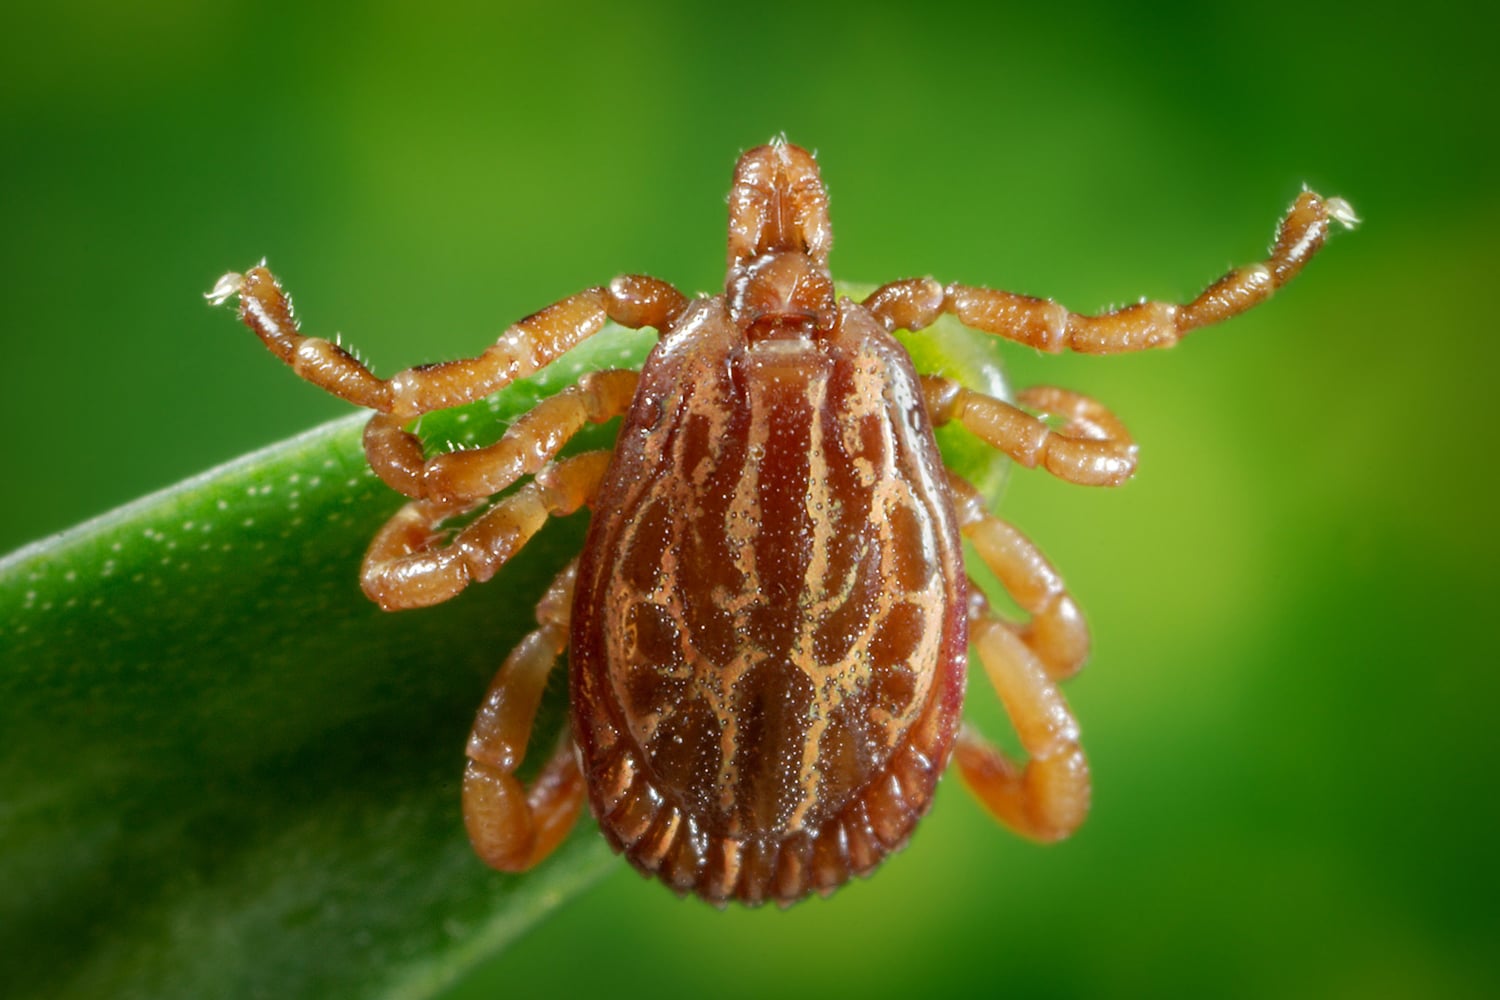 horizontal photo of a brown dog tick on a leaf with a green background - Ticks in Ohio